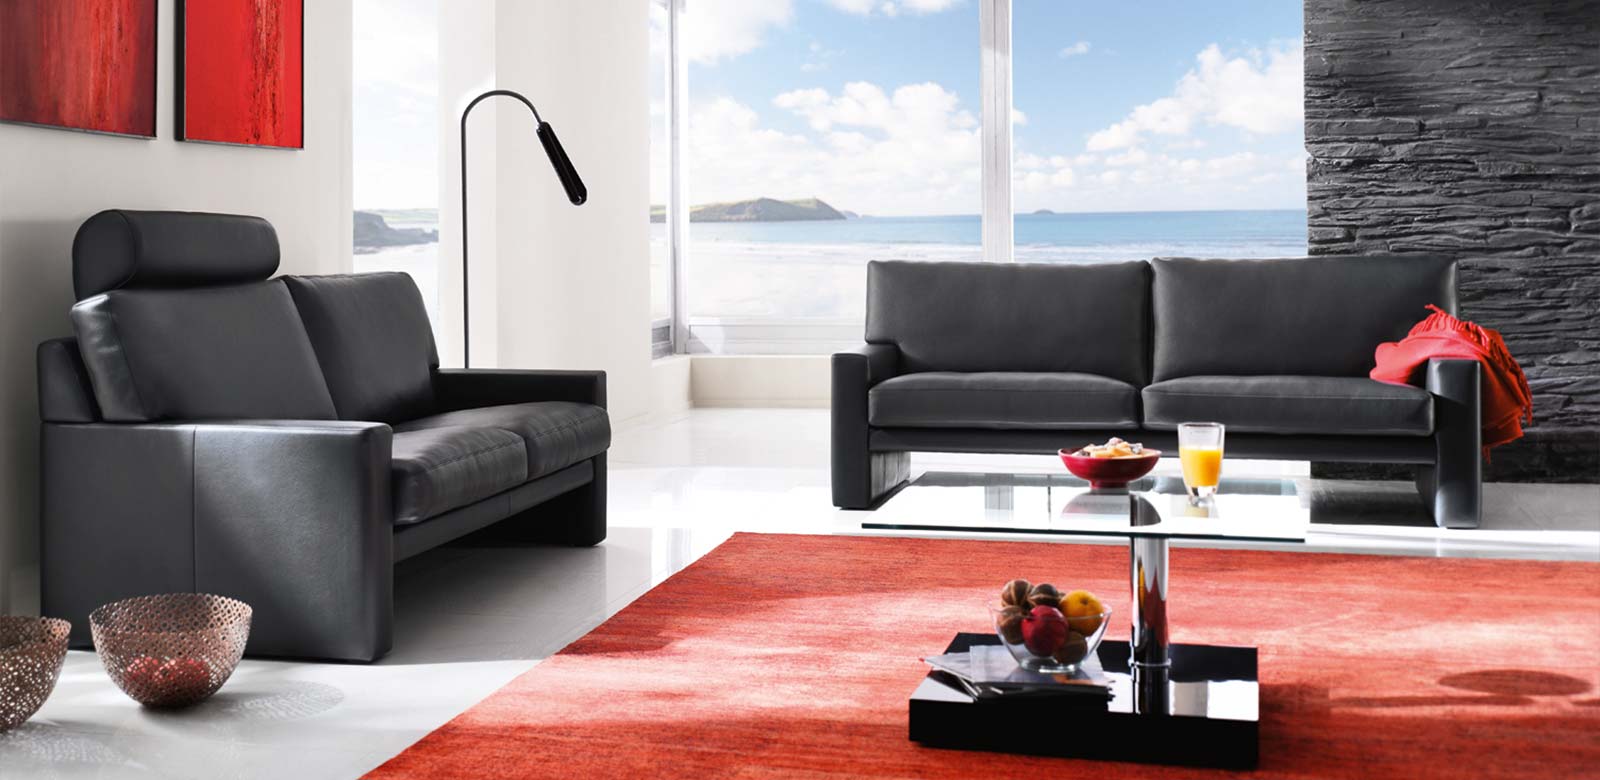 Two CL200 sofas in black leather with headrest in modern beach villa with red and black accents on carpets and walls.